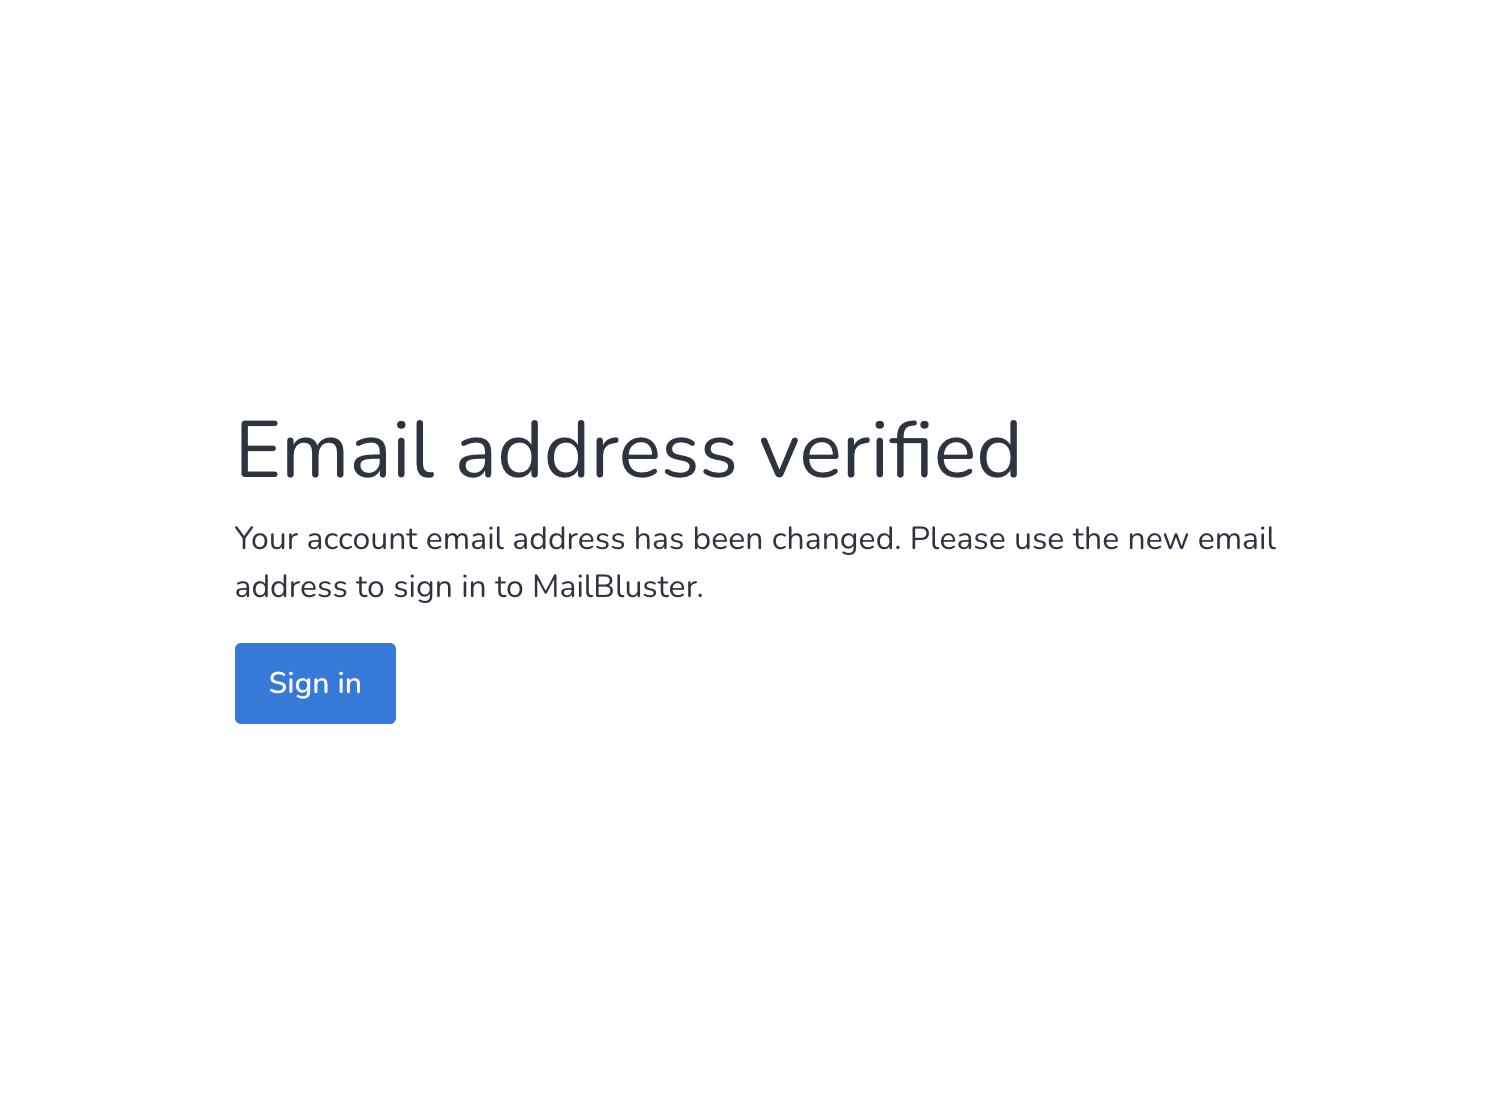 Email address is verified successfully 